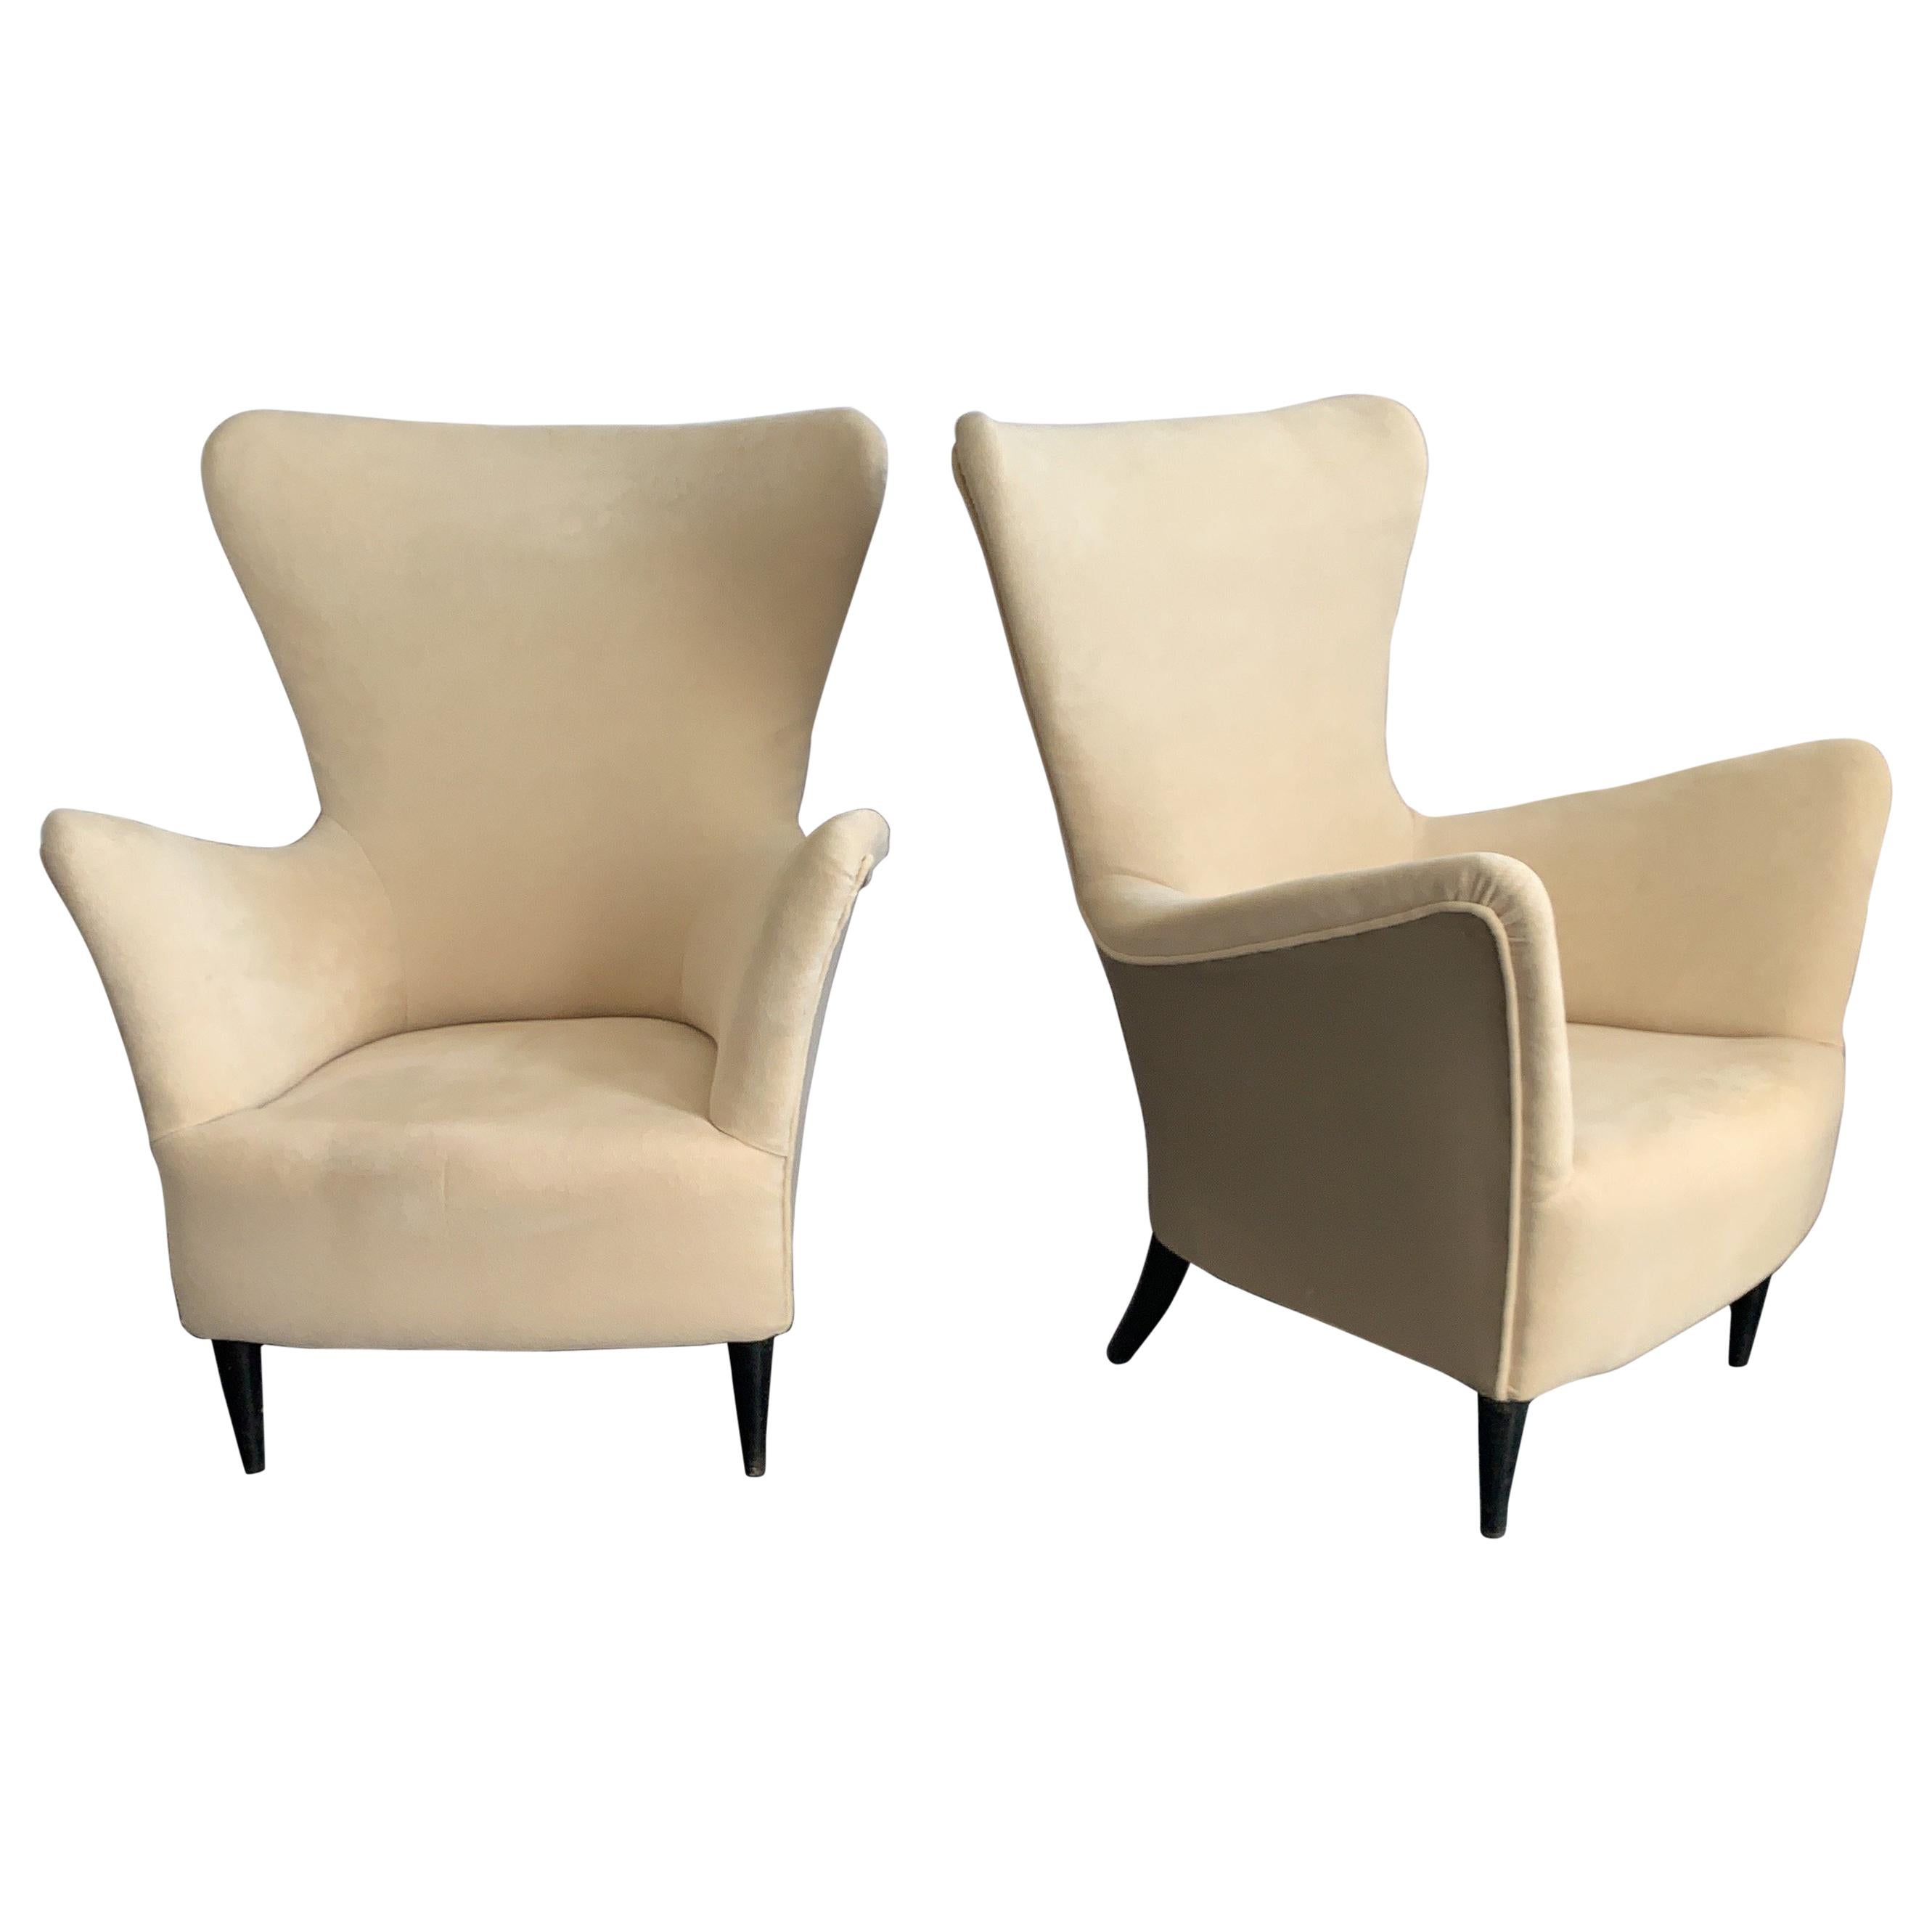 Midcentury Italian Gio Ponti Armchairs with Later Upholstery